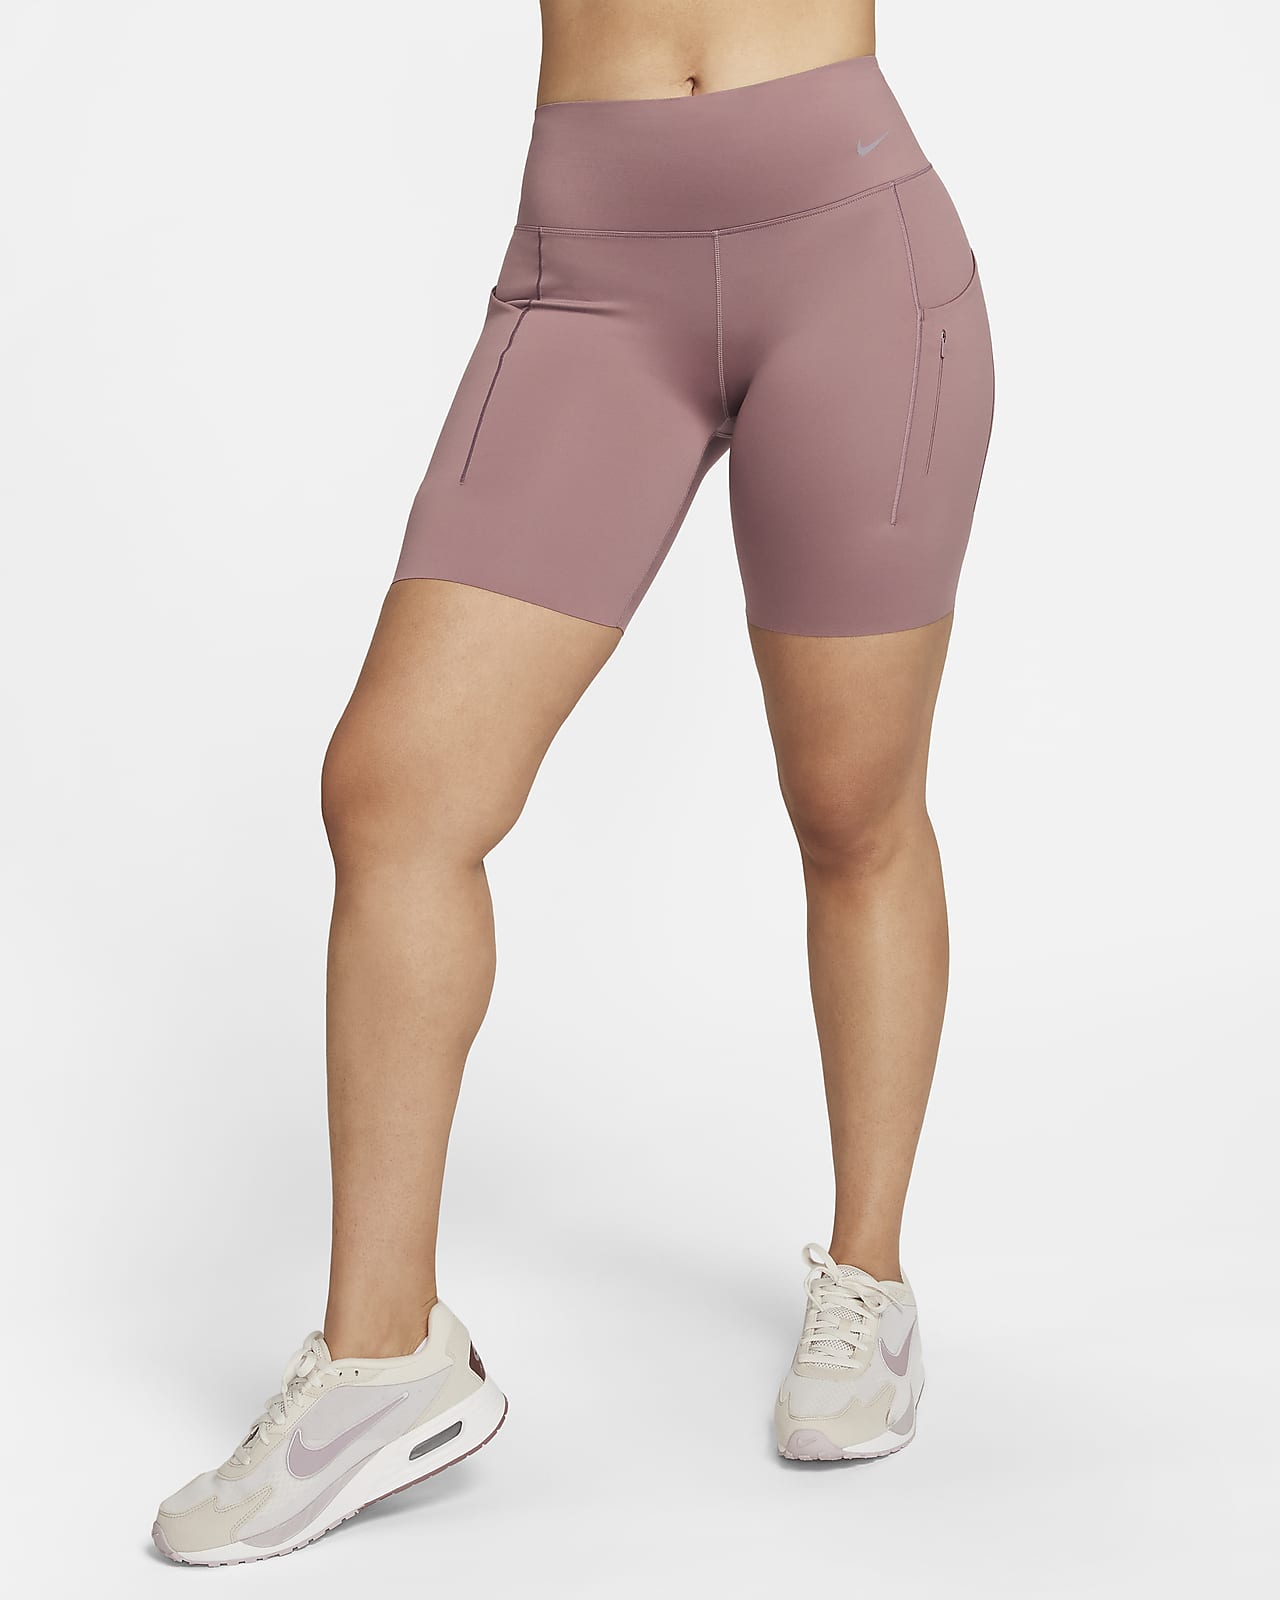 Nike Go Women's Firm-Support Mid-Rise 20cm (approx.) Biker Shorts